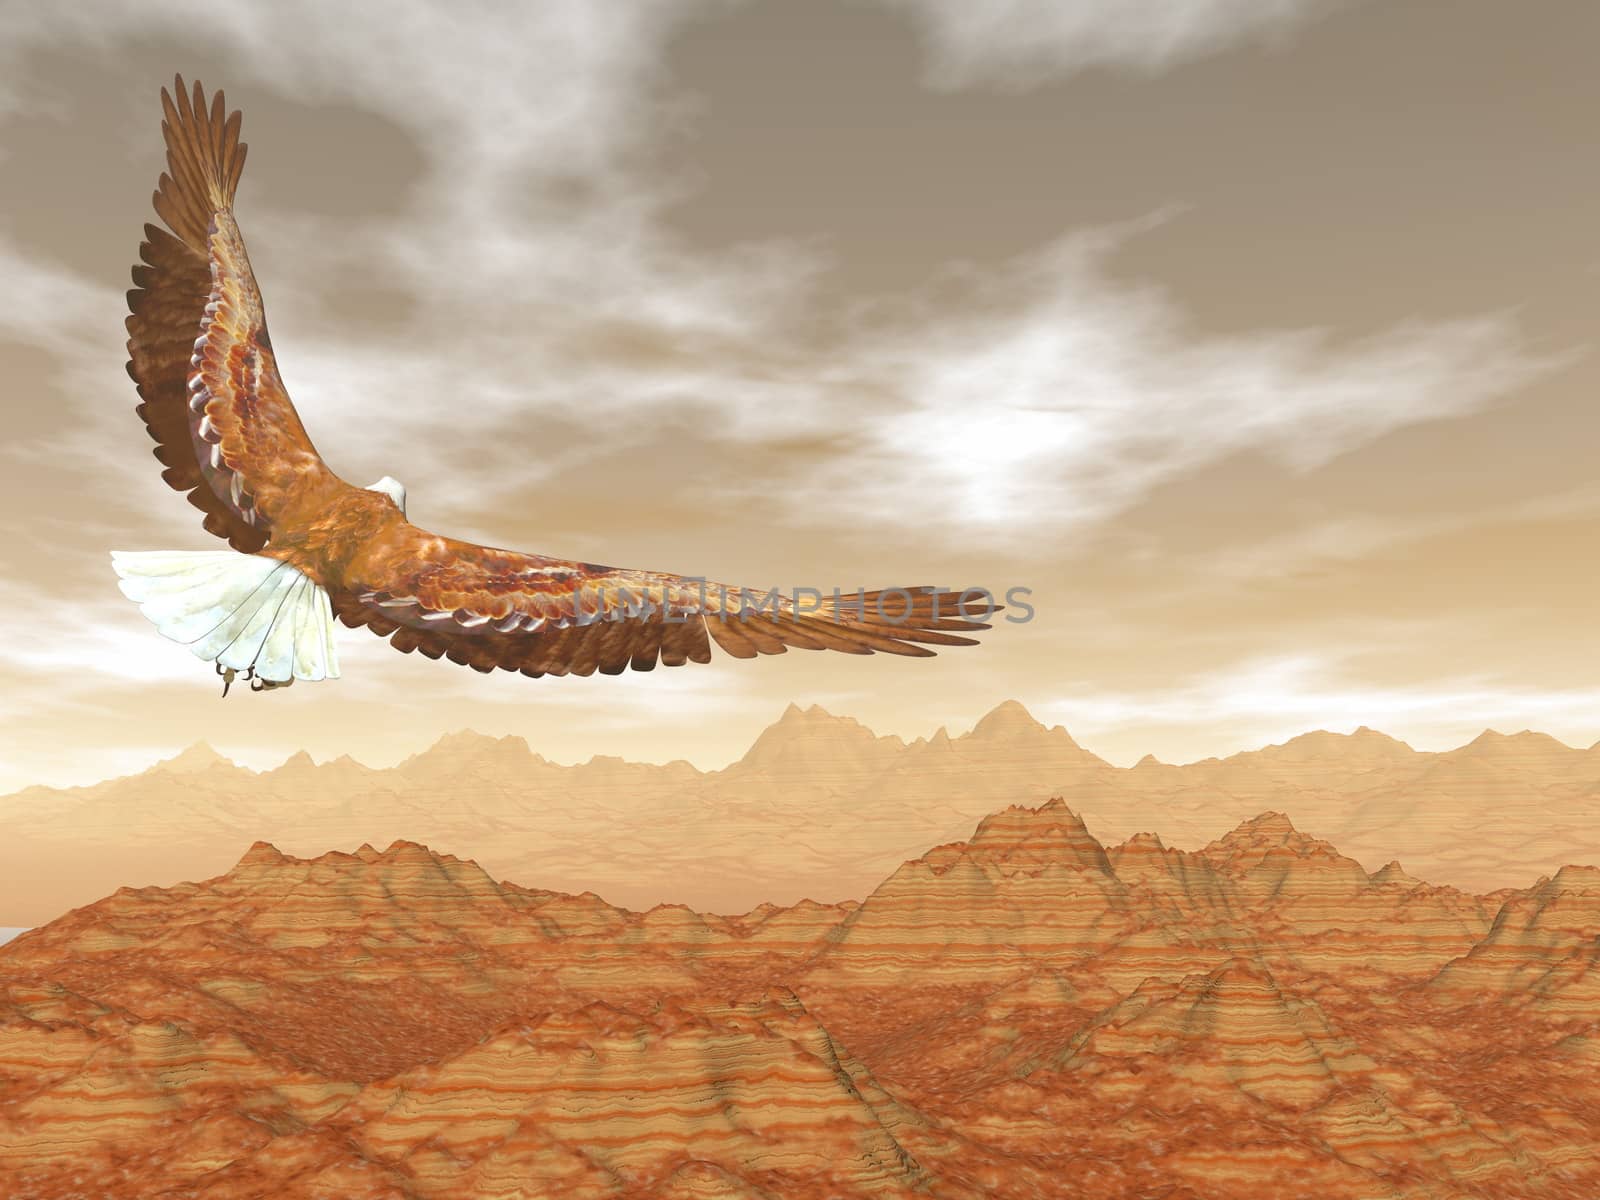 Bald eagle flying upon rocky mountains - 3D render by Elenaphotos21